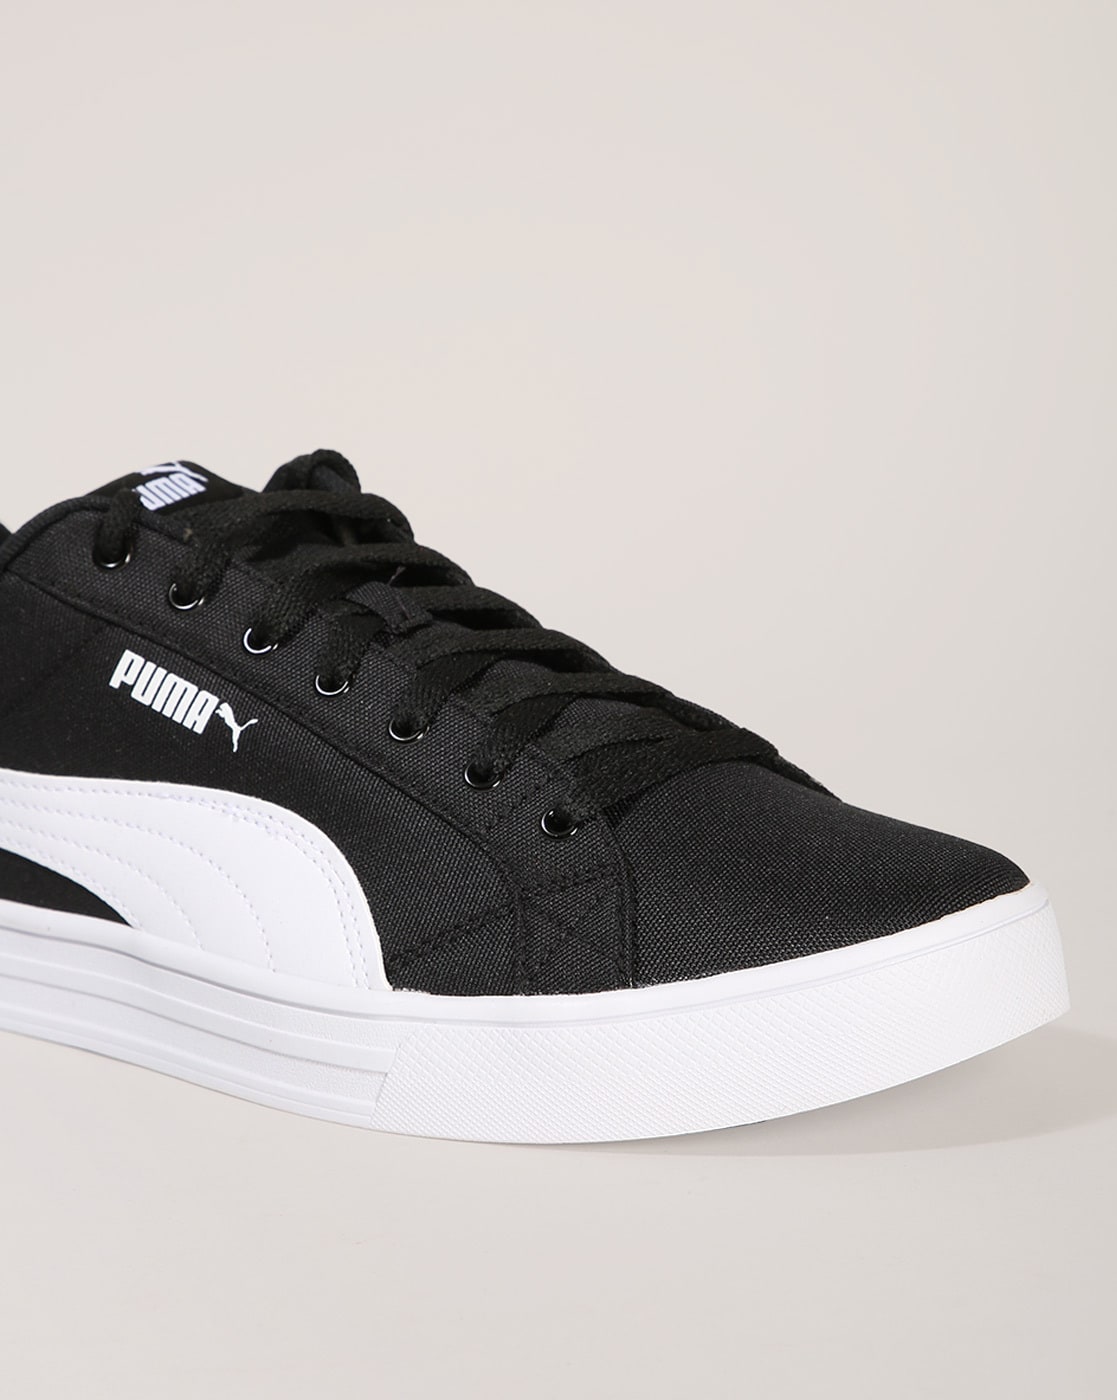 Puma Campus Vulc Casual Shoes - Buy Puma Campus Vulc Casual Shoes online in  India